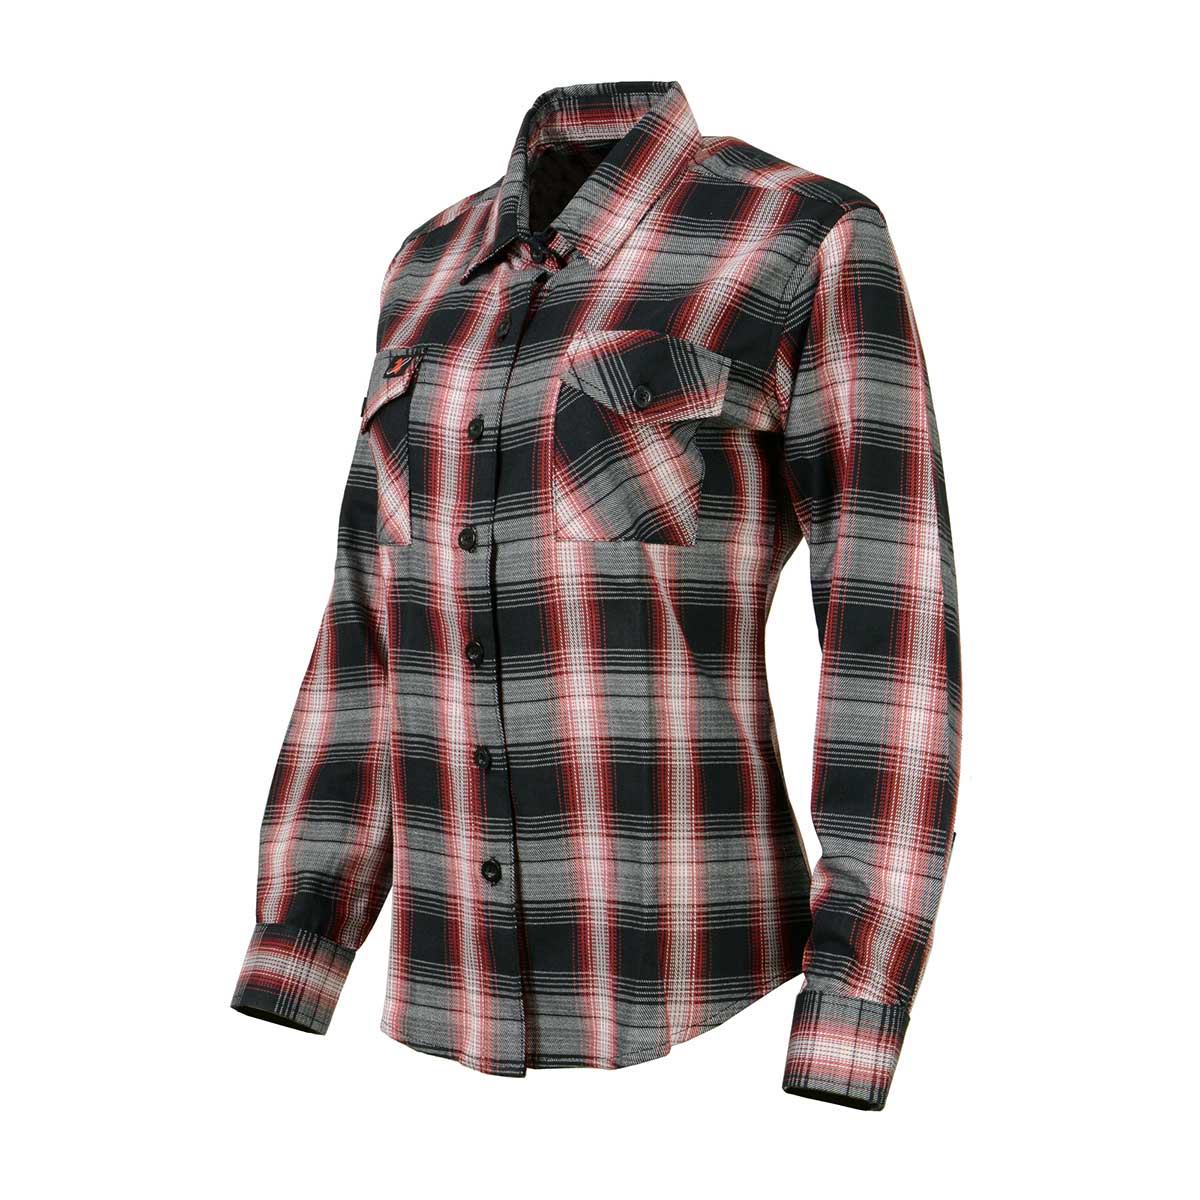 Women's Black and Red with White Long Sleeve Cotton Flannel Shirt